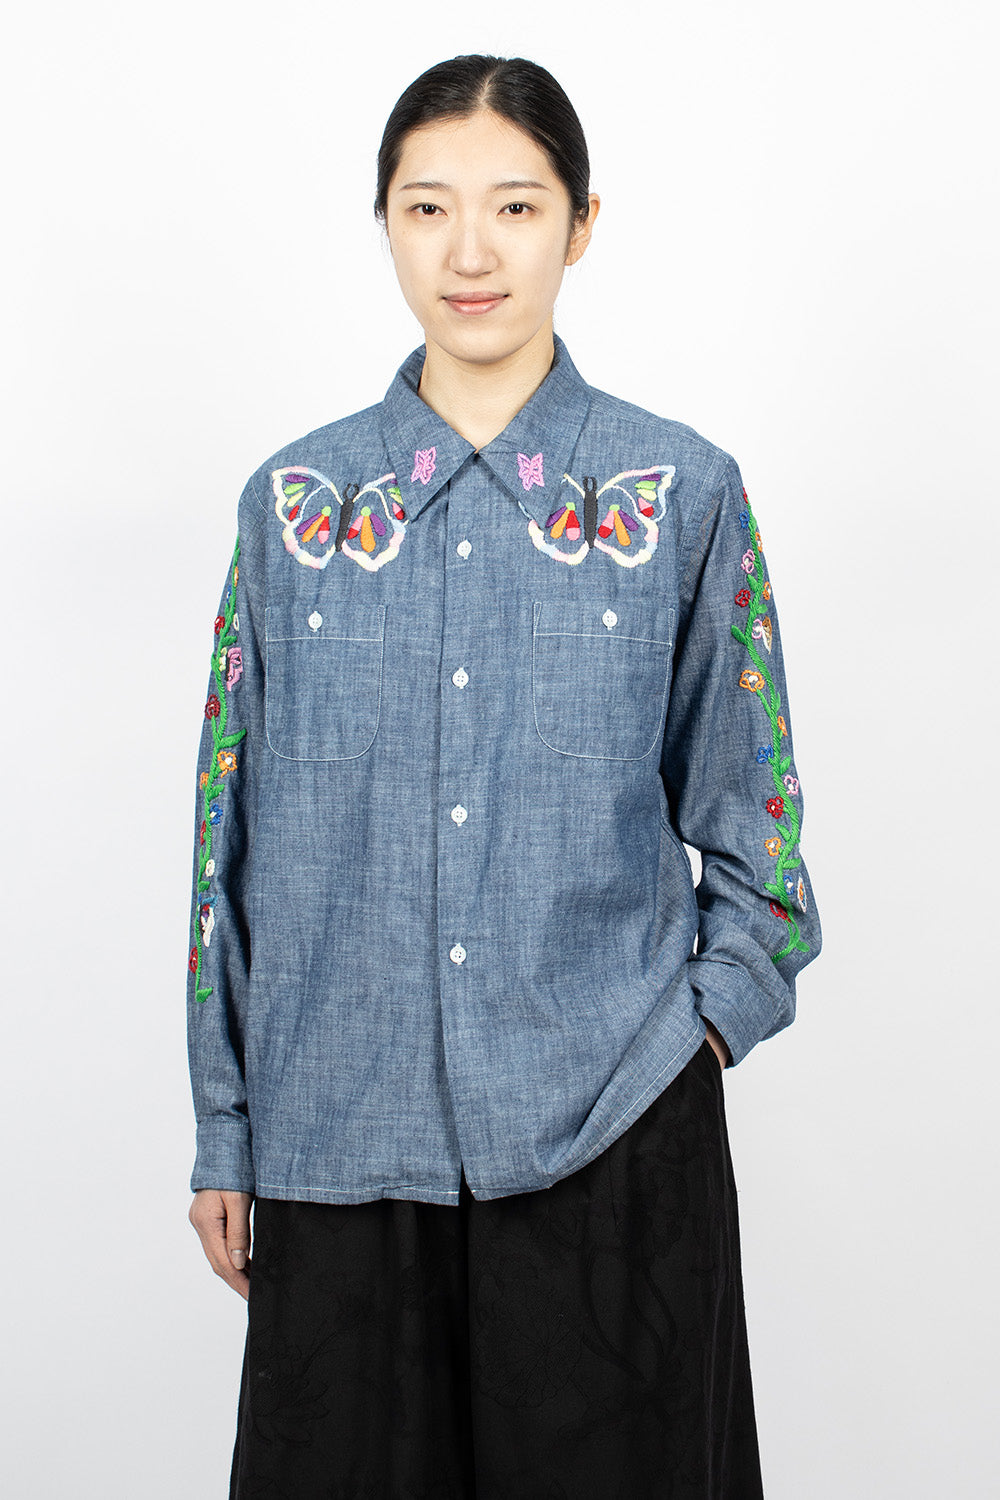 One-Up Shirt Chambray Embroidery